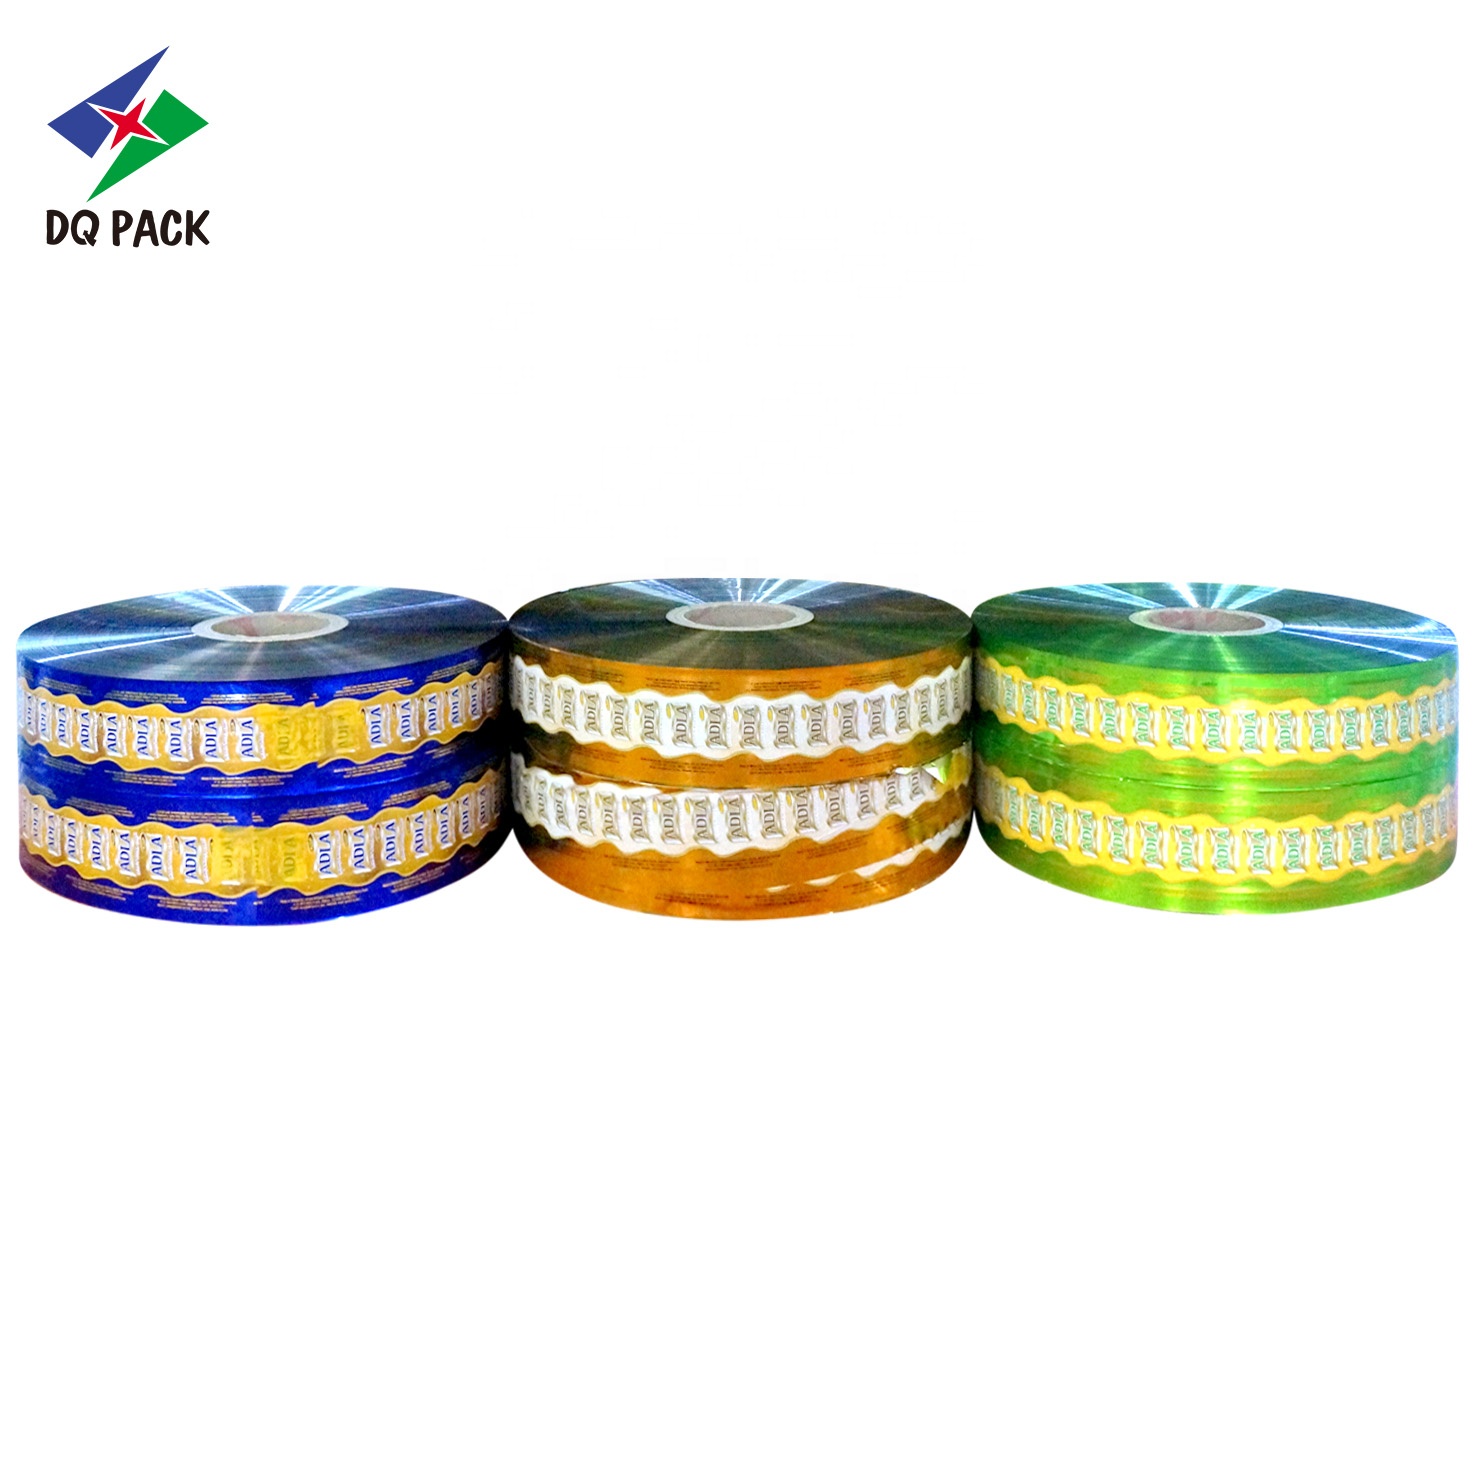 DQ PACK Superior Candy/Chocalate/Biscuits Twist Wrap Film Flexible Plastic Packaging Roll Film For Snacks